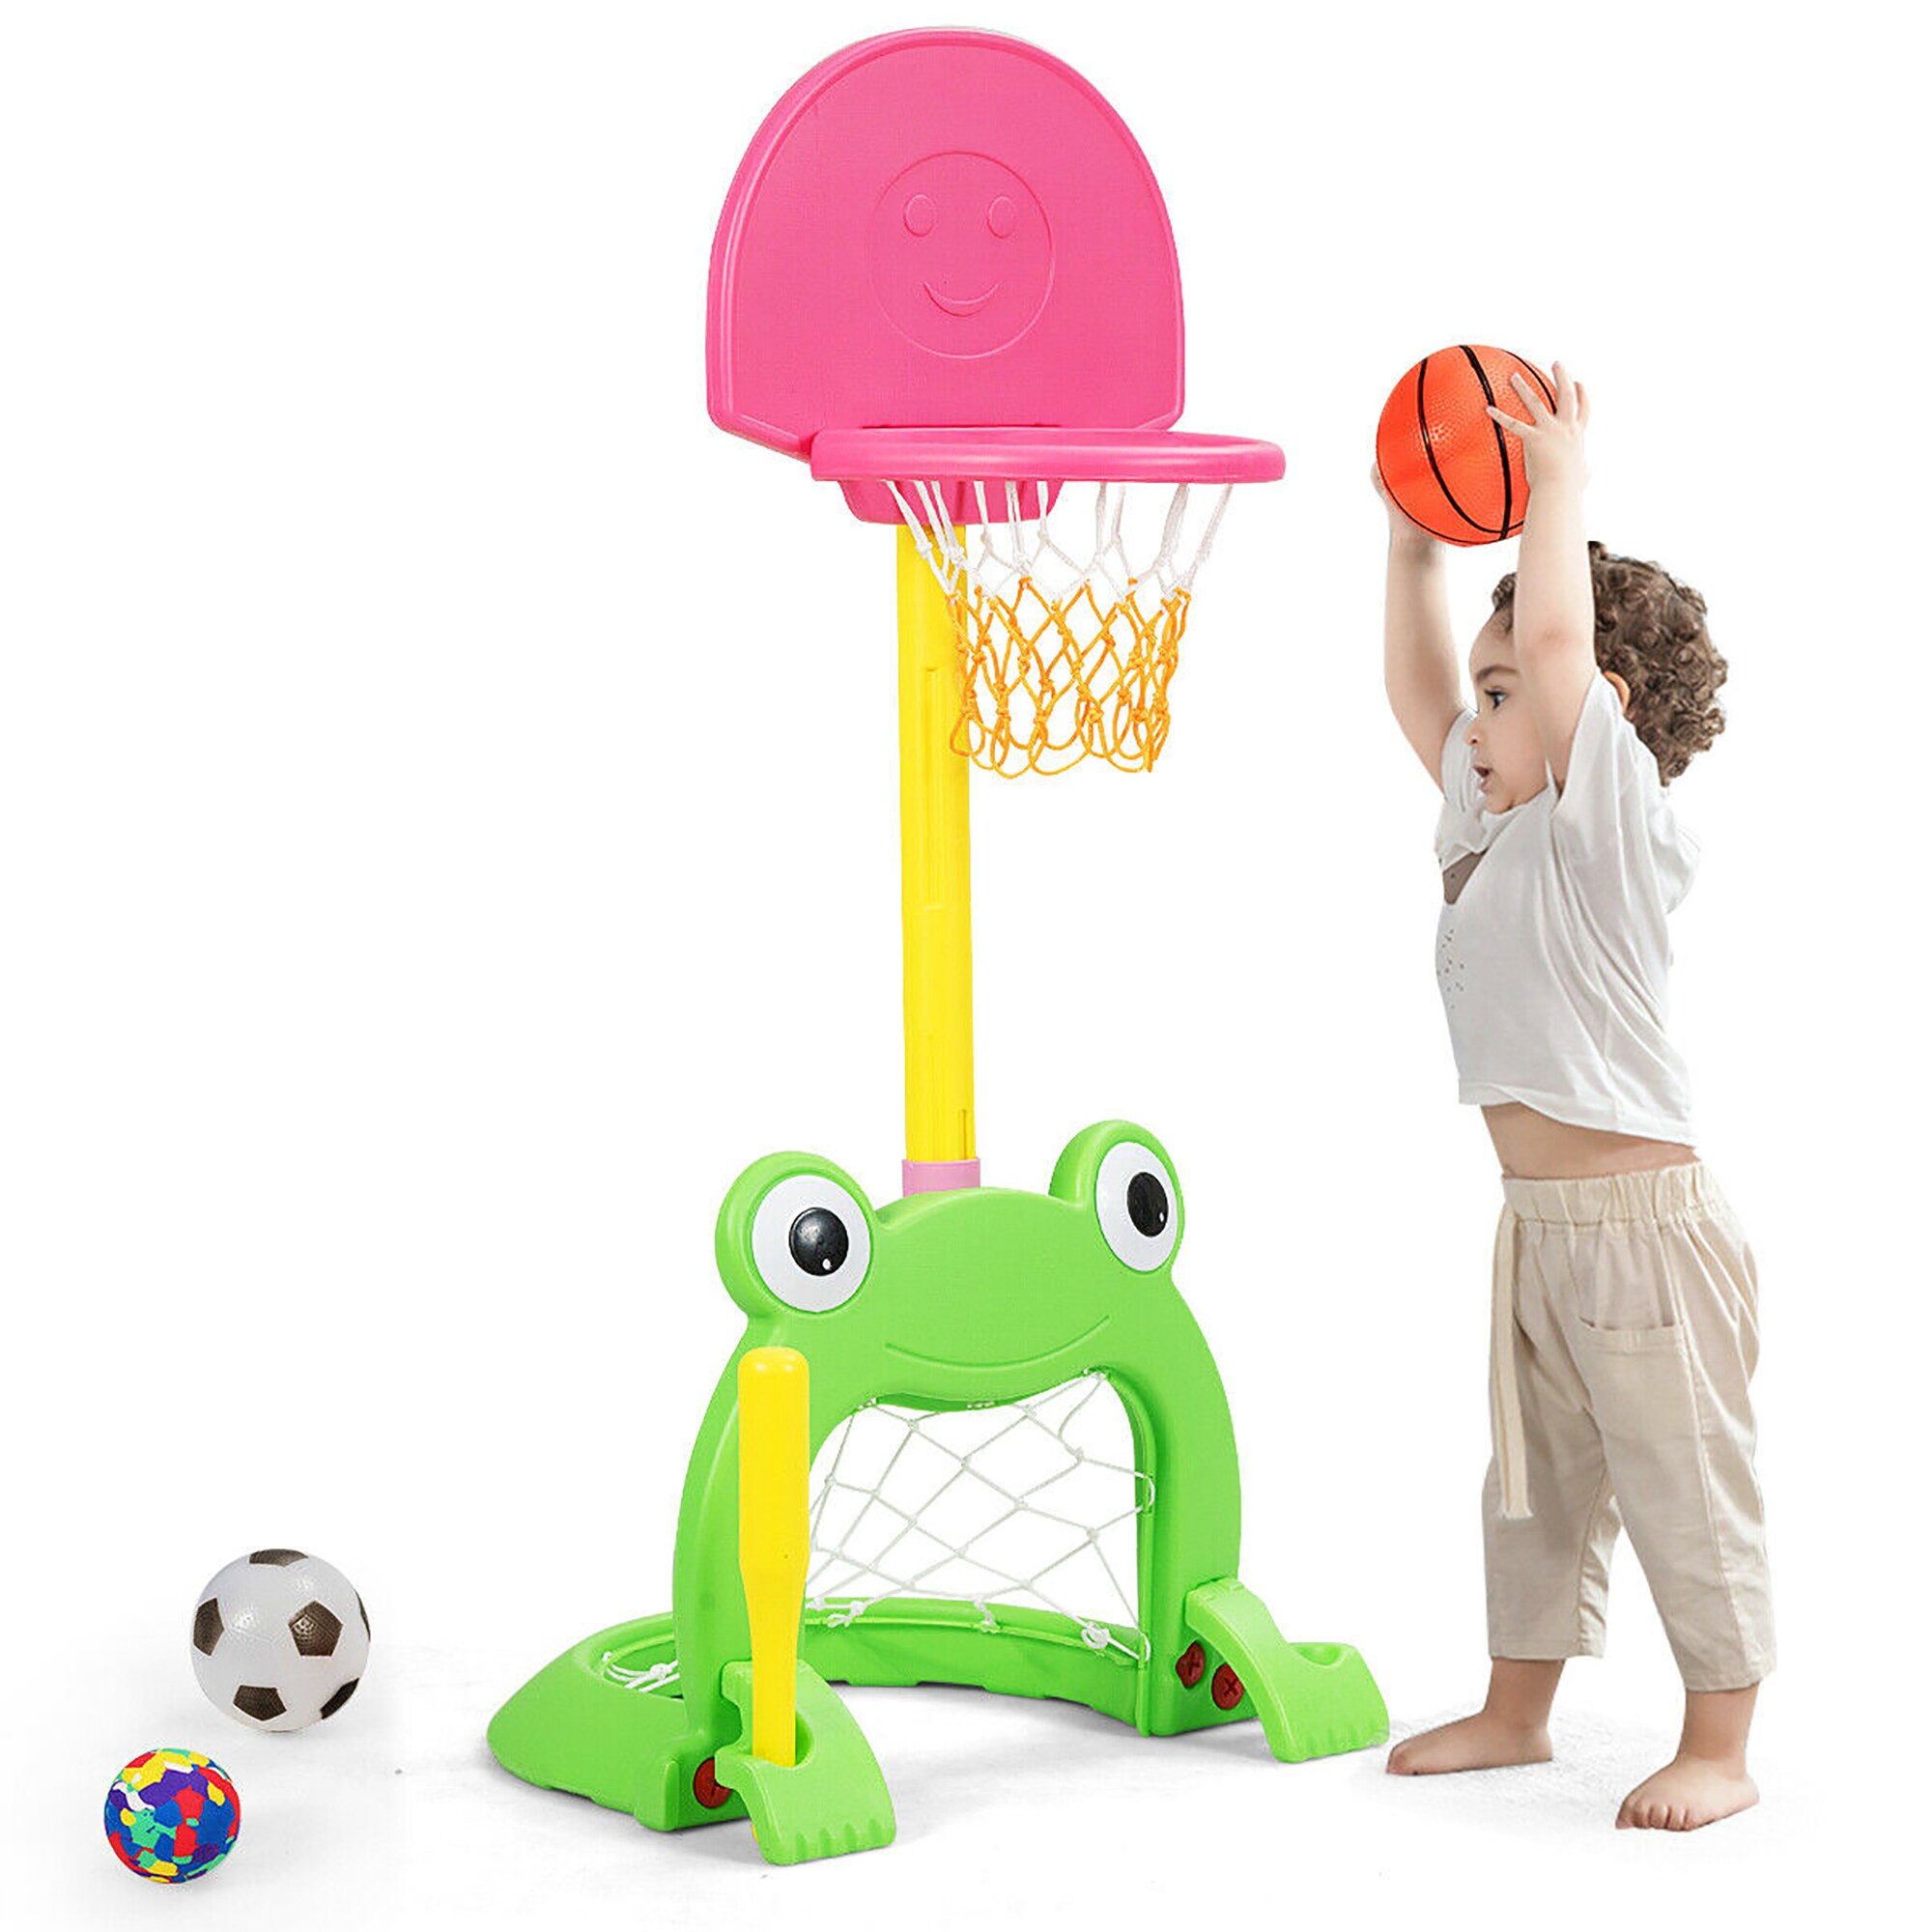 Best Gift for Kids 3 in 1 Sports Activity Center Grow-to-Pro Adjustable Basketball Toy for Indoor & Outdoor Enlitoys Kids Basketball Hoop Set Blue 